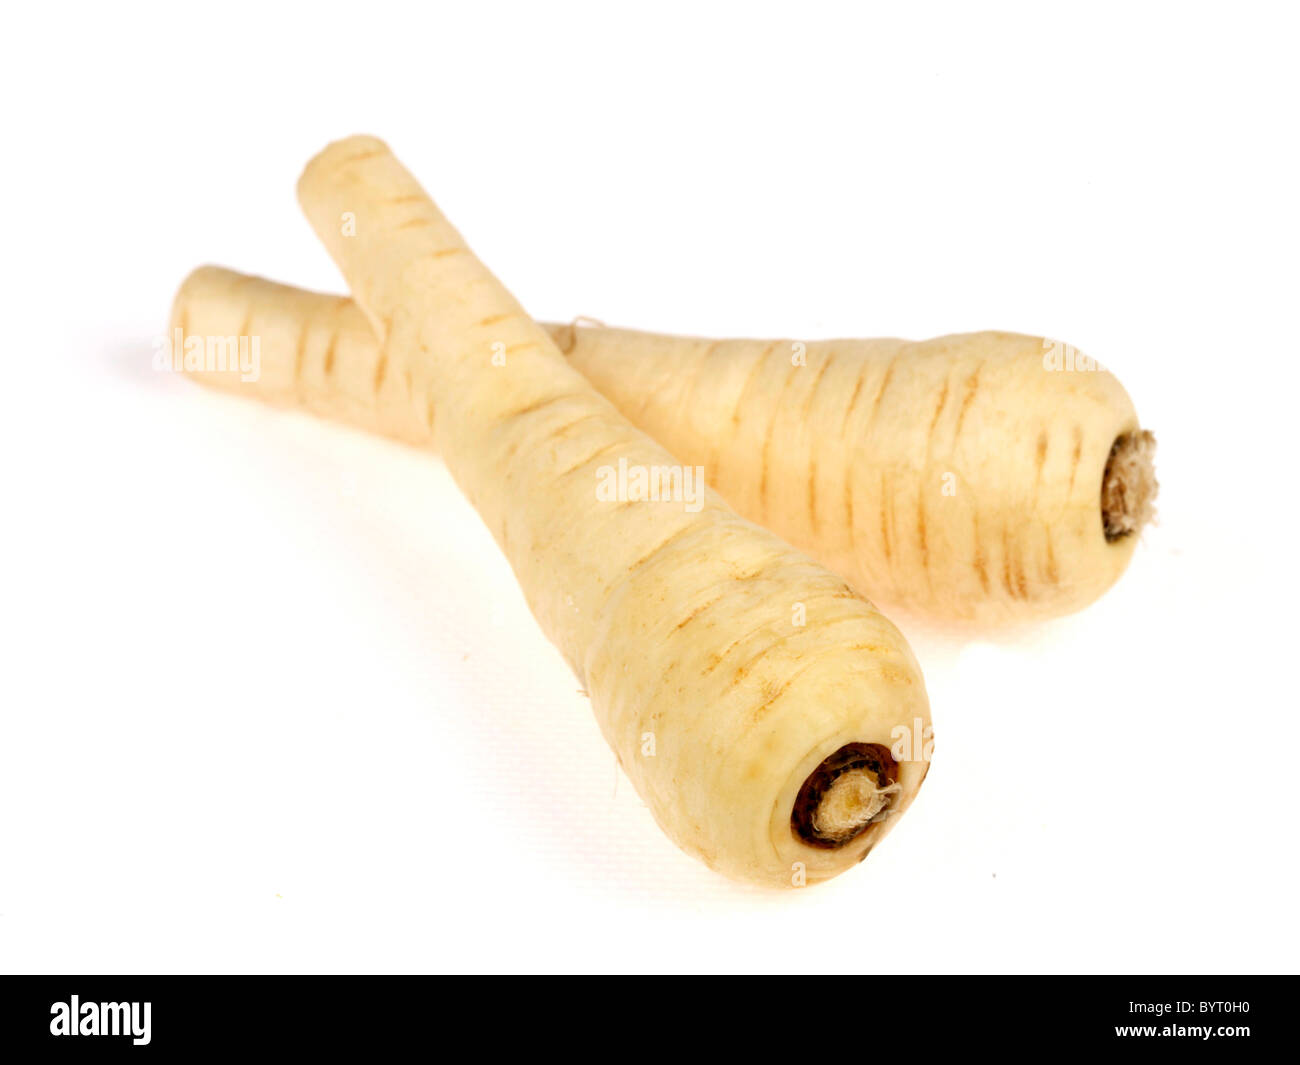 Fresh Ripe Cleaned Parsnips Ready For Cooking Against A White Background With No People A Clipping Path and Copy Space Stock Photo